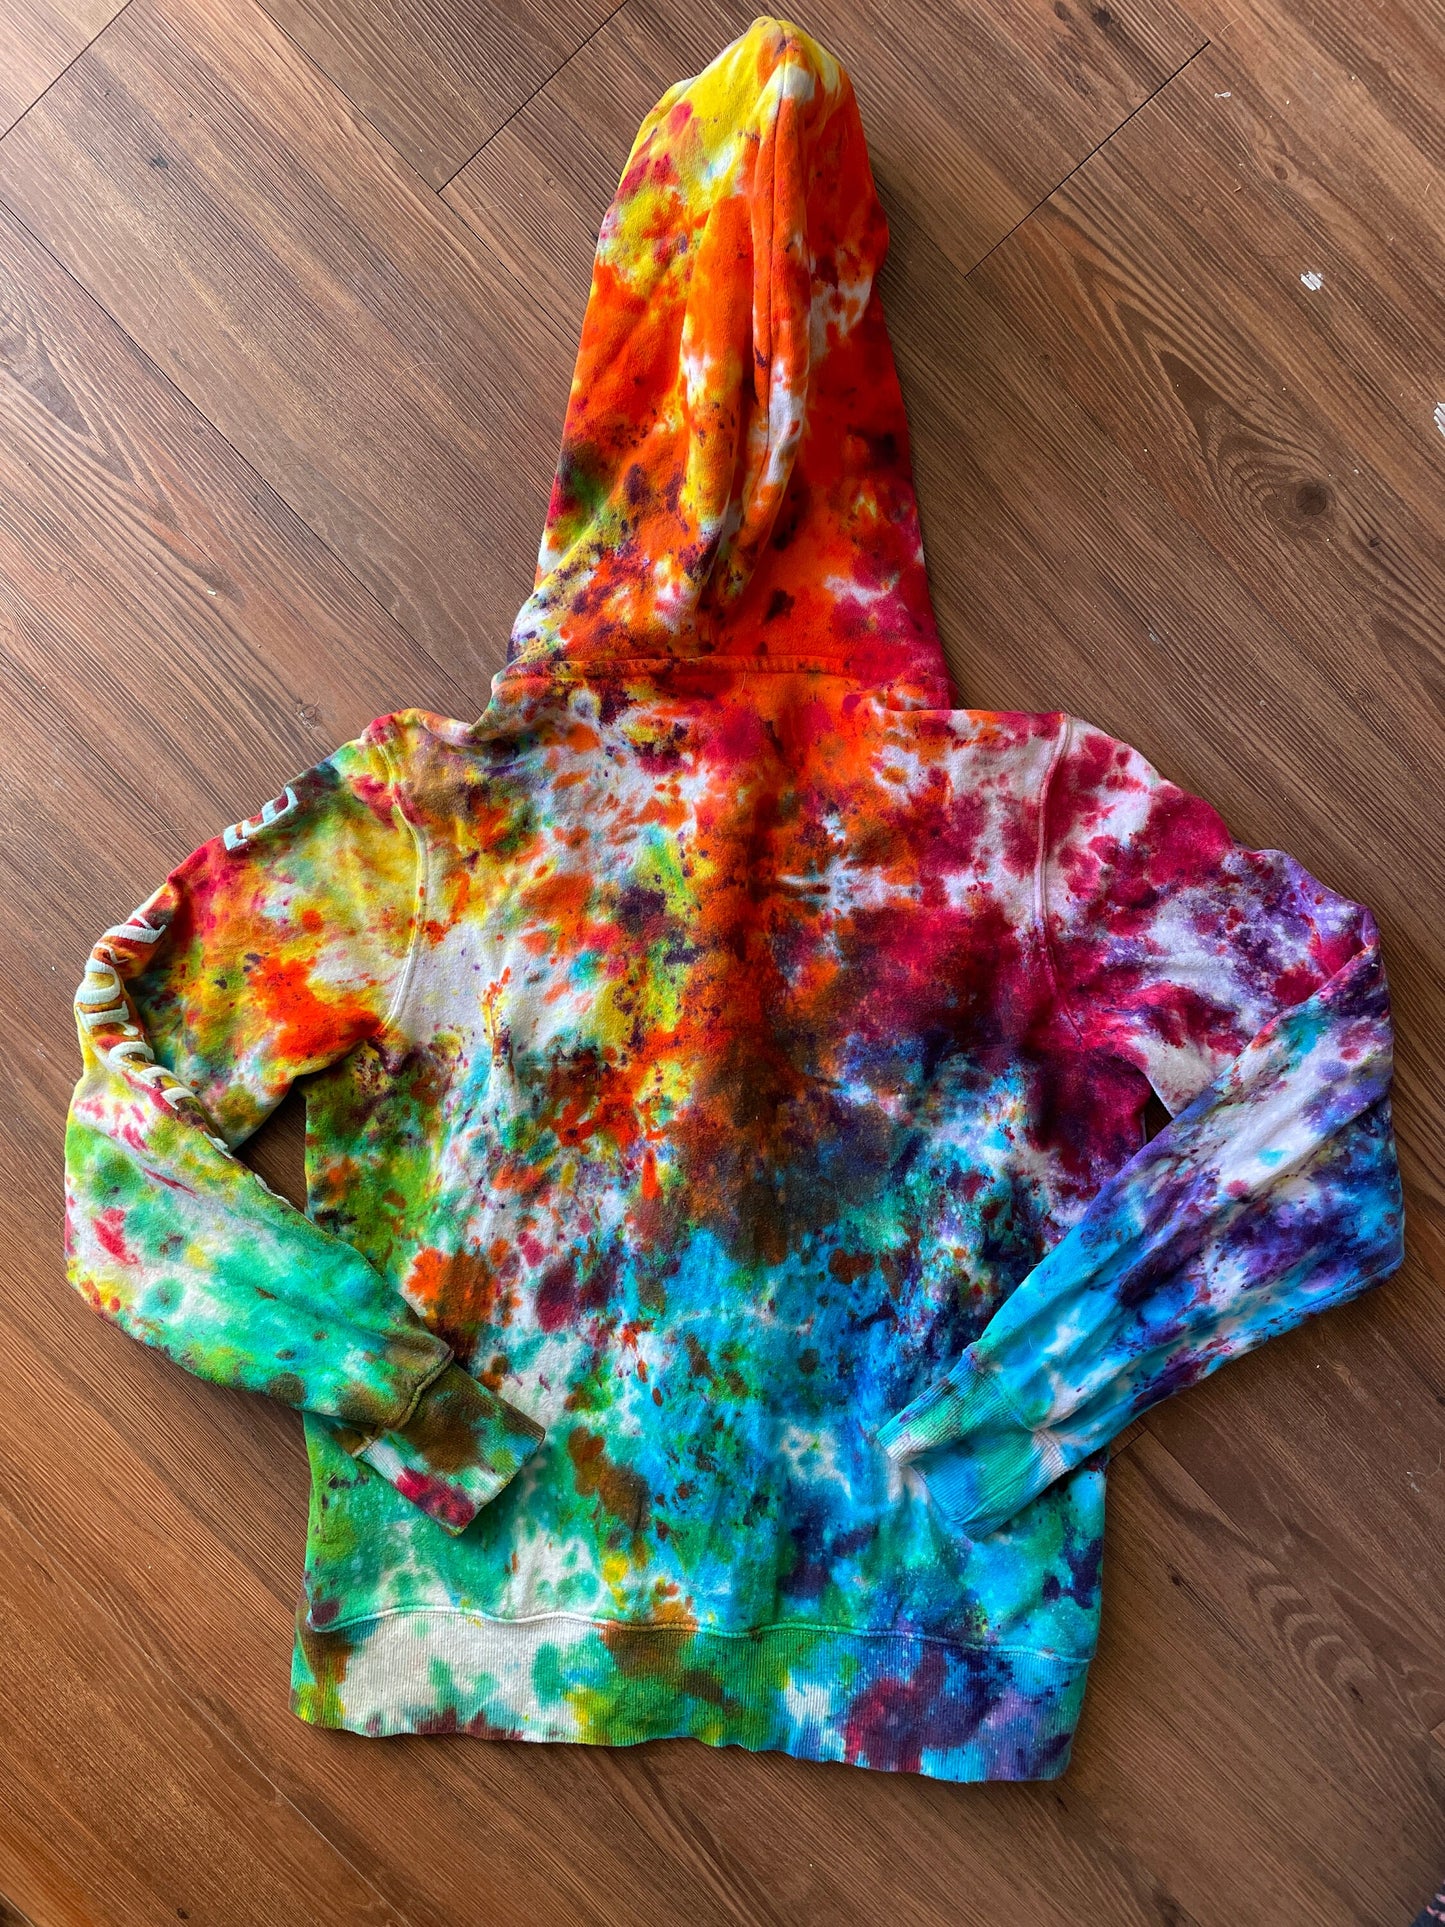 The North Face Rainbow Ice Dye Zip-Up Hoodie | Upcycled Long Sleeve Top | Women's Size Medium | Handmade & Thrifted